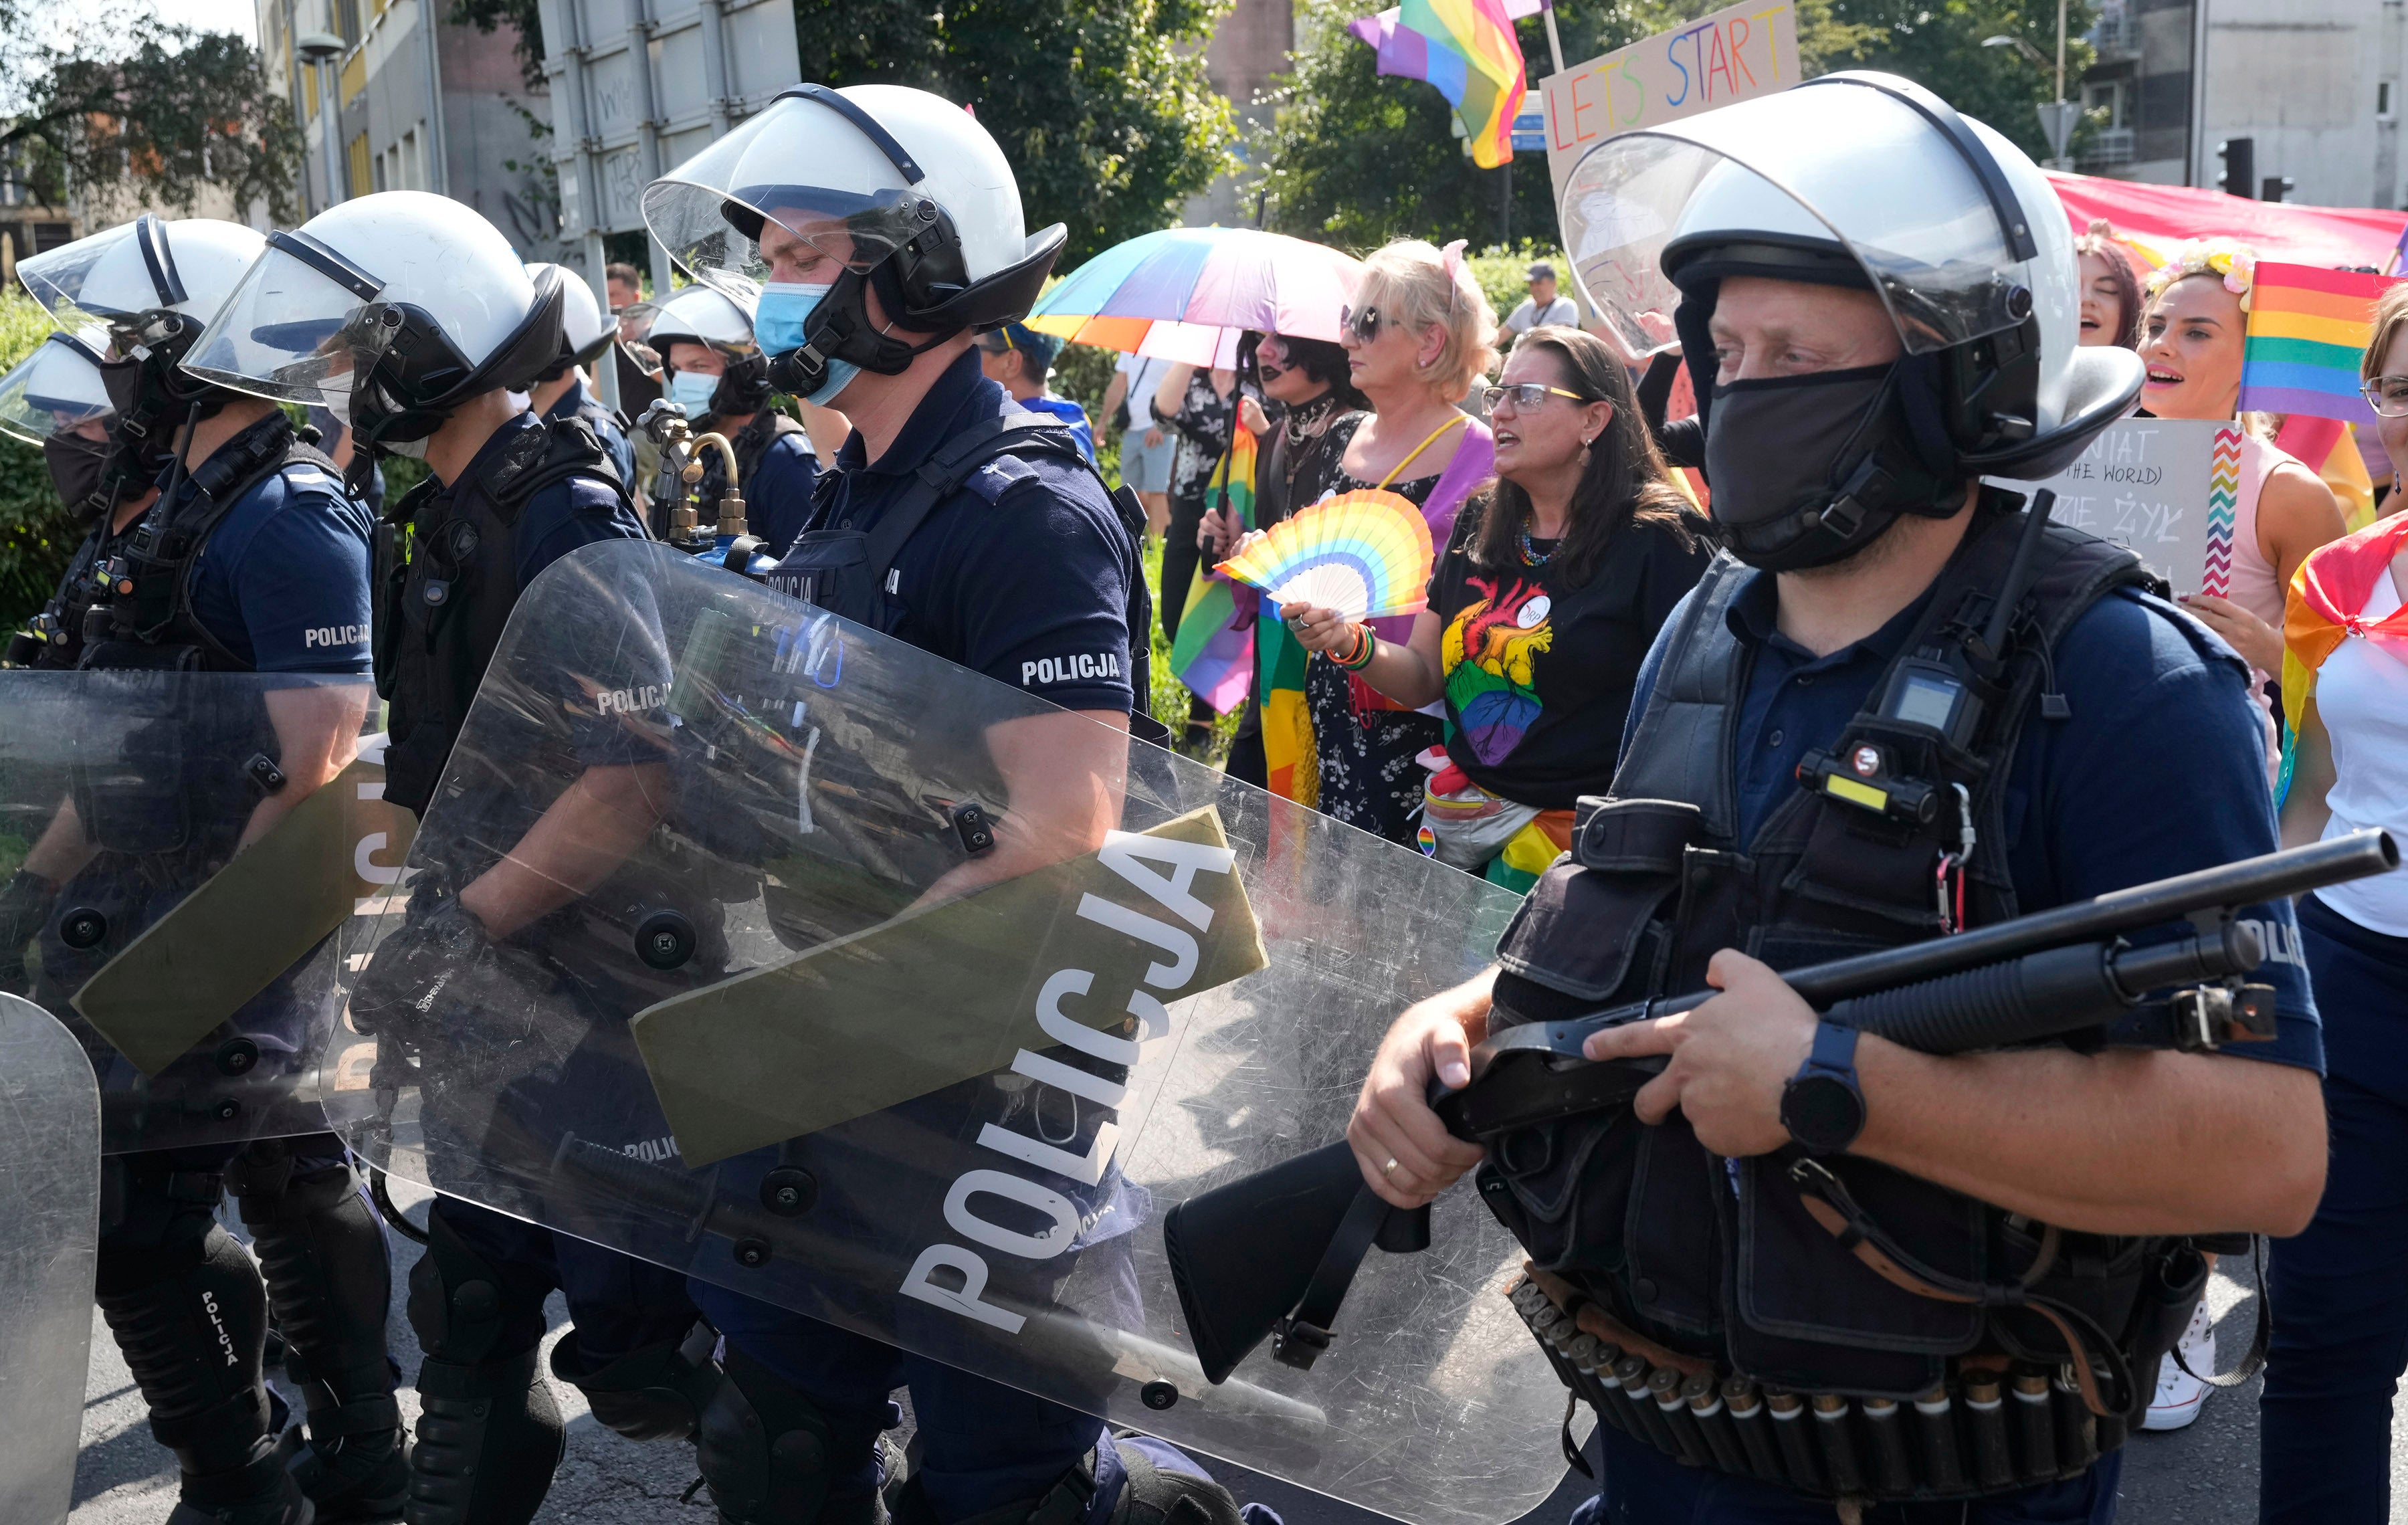 LGBT marchers with parade with rainbow flags in Poland amid heavy police presence